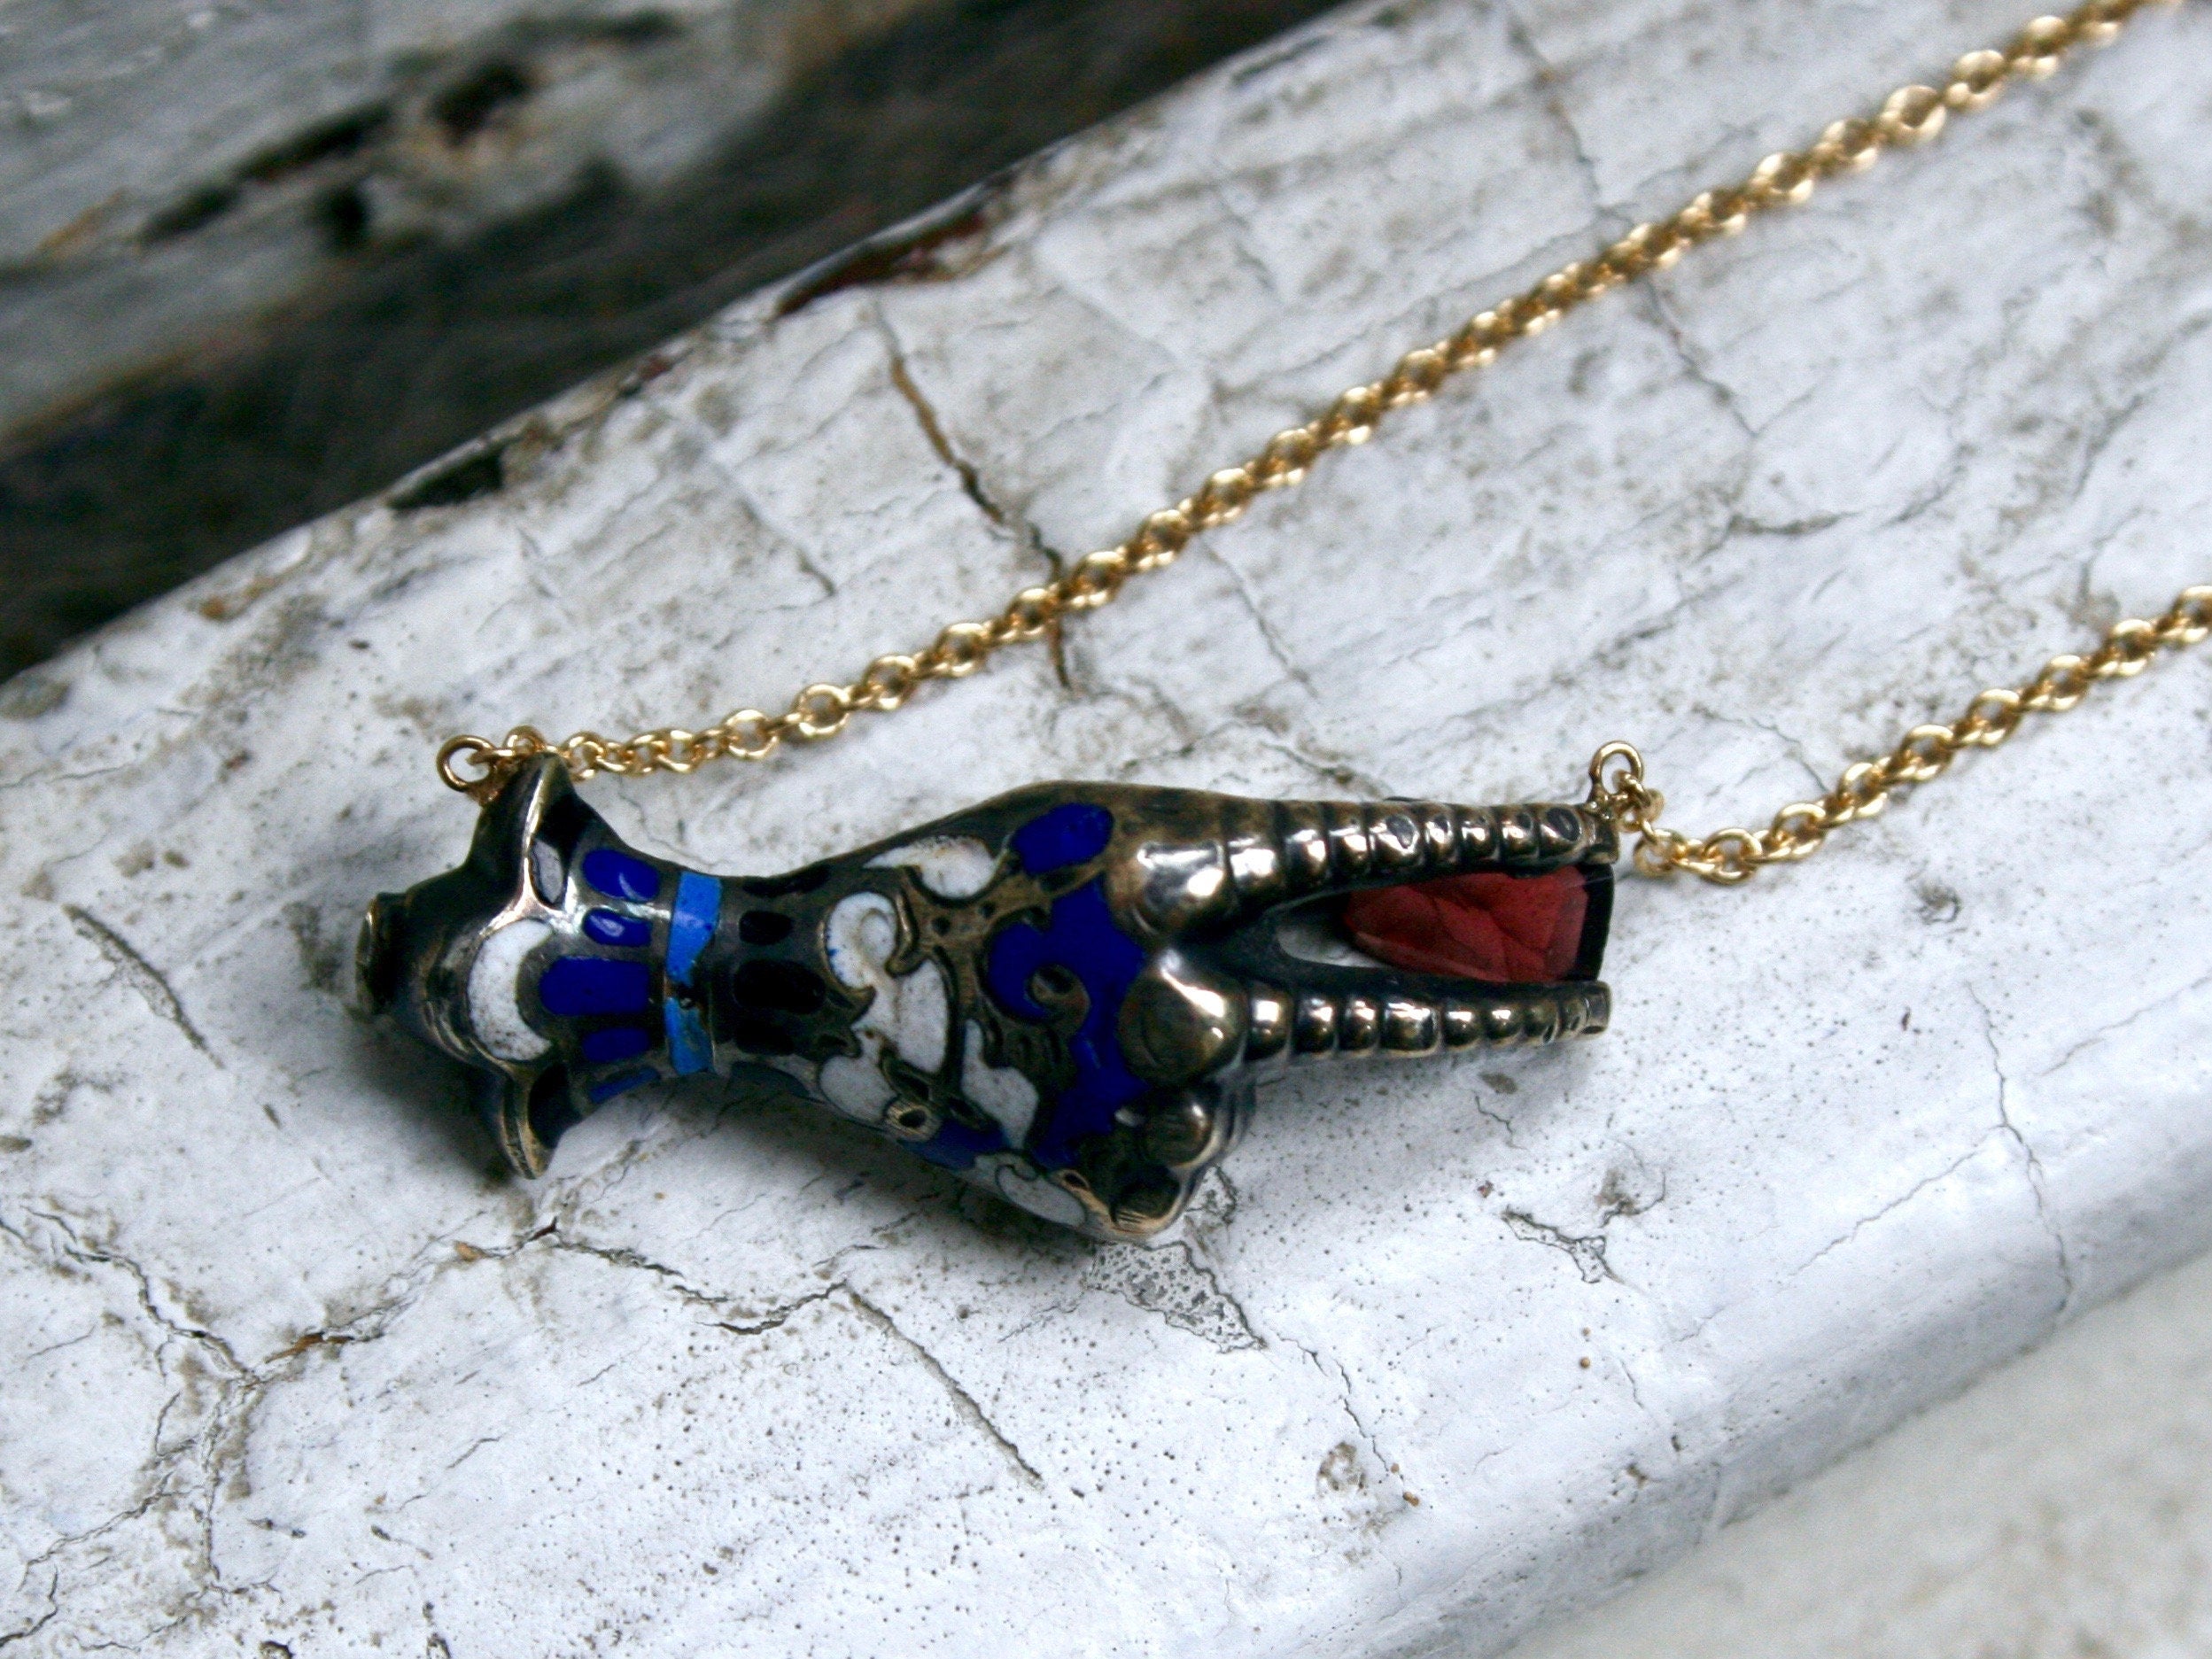 Antique Silver/ 14K Yellow Gold Hand Pendant with Garnet and Enamel Necklace.